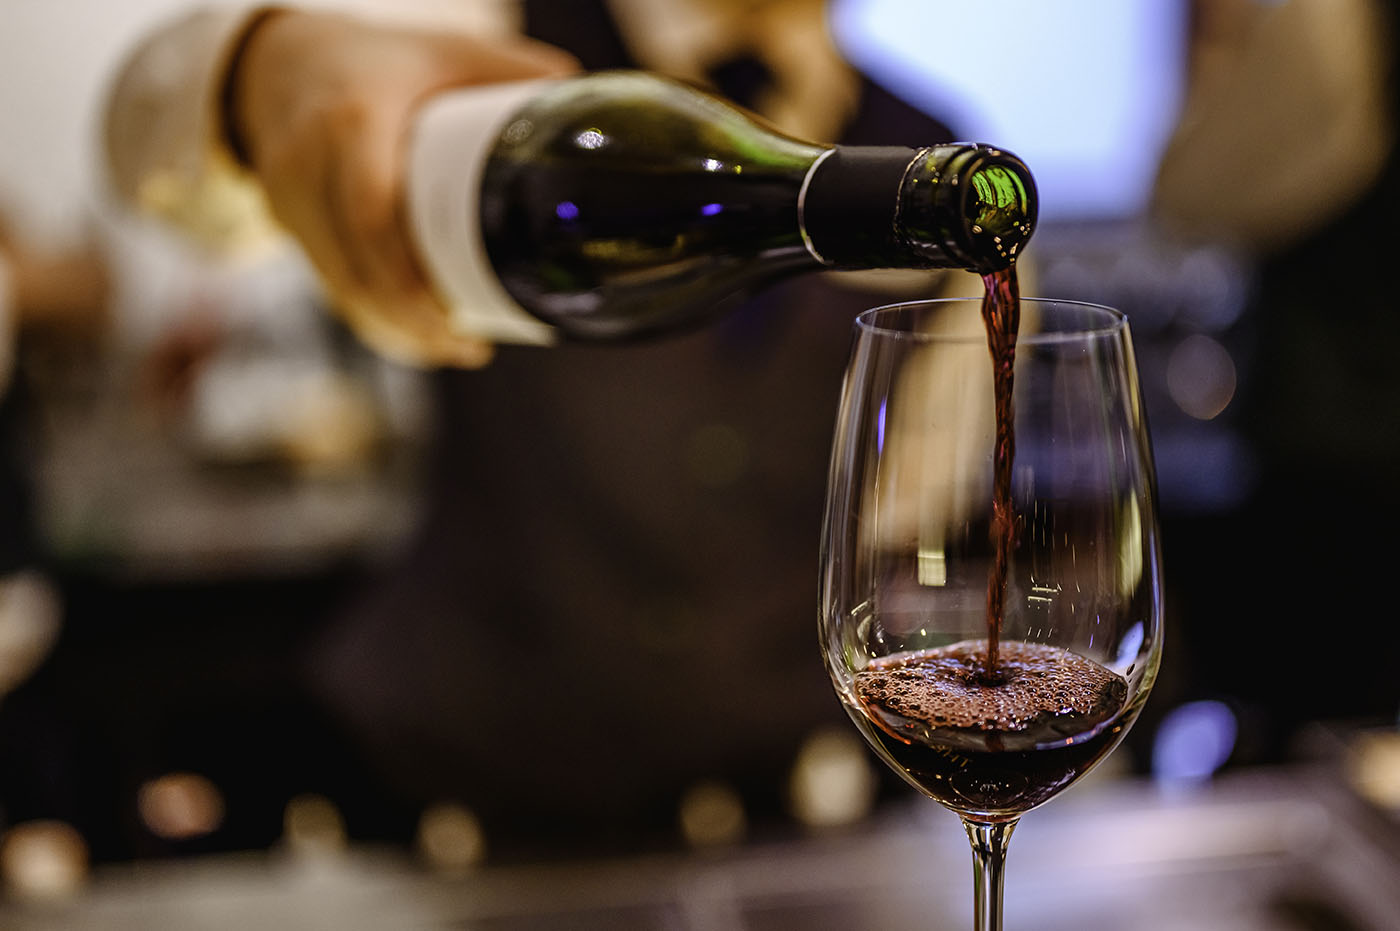 What will be the impact of Covid19 on the fine wine market?